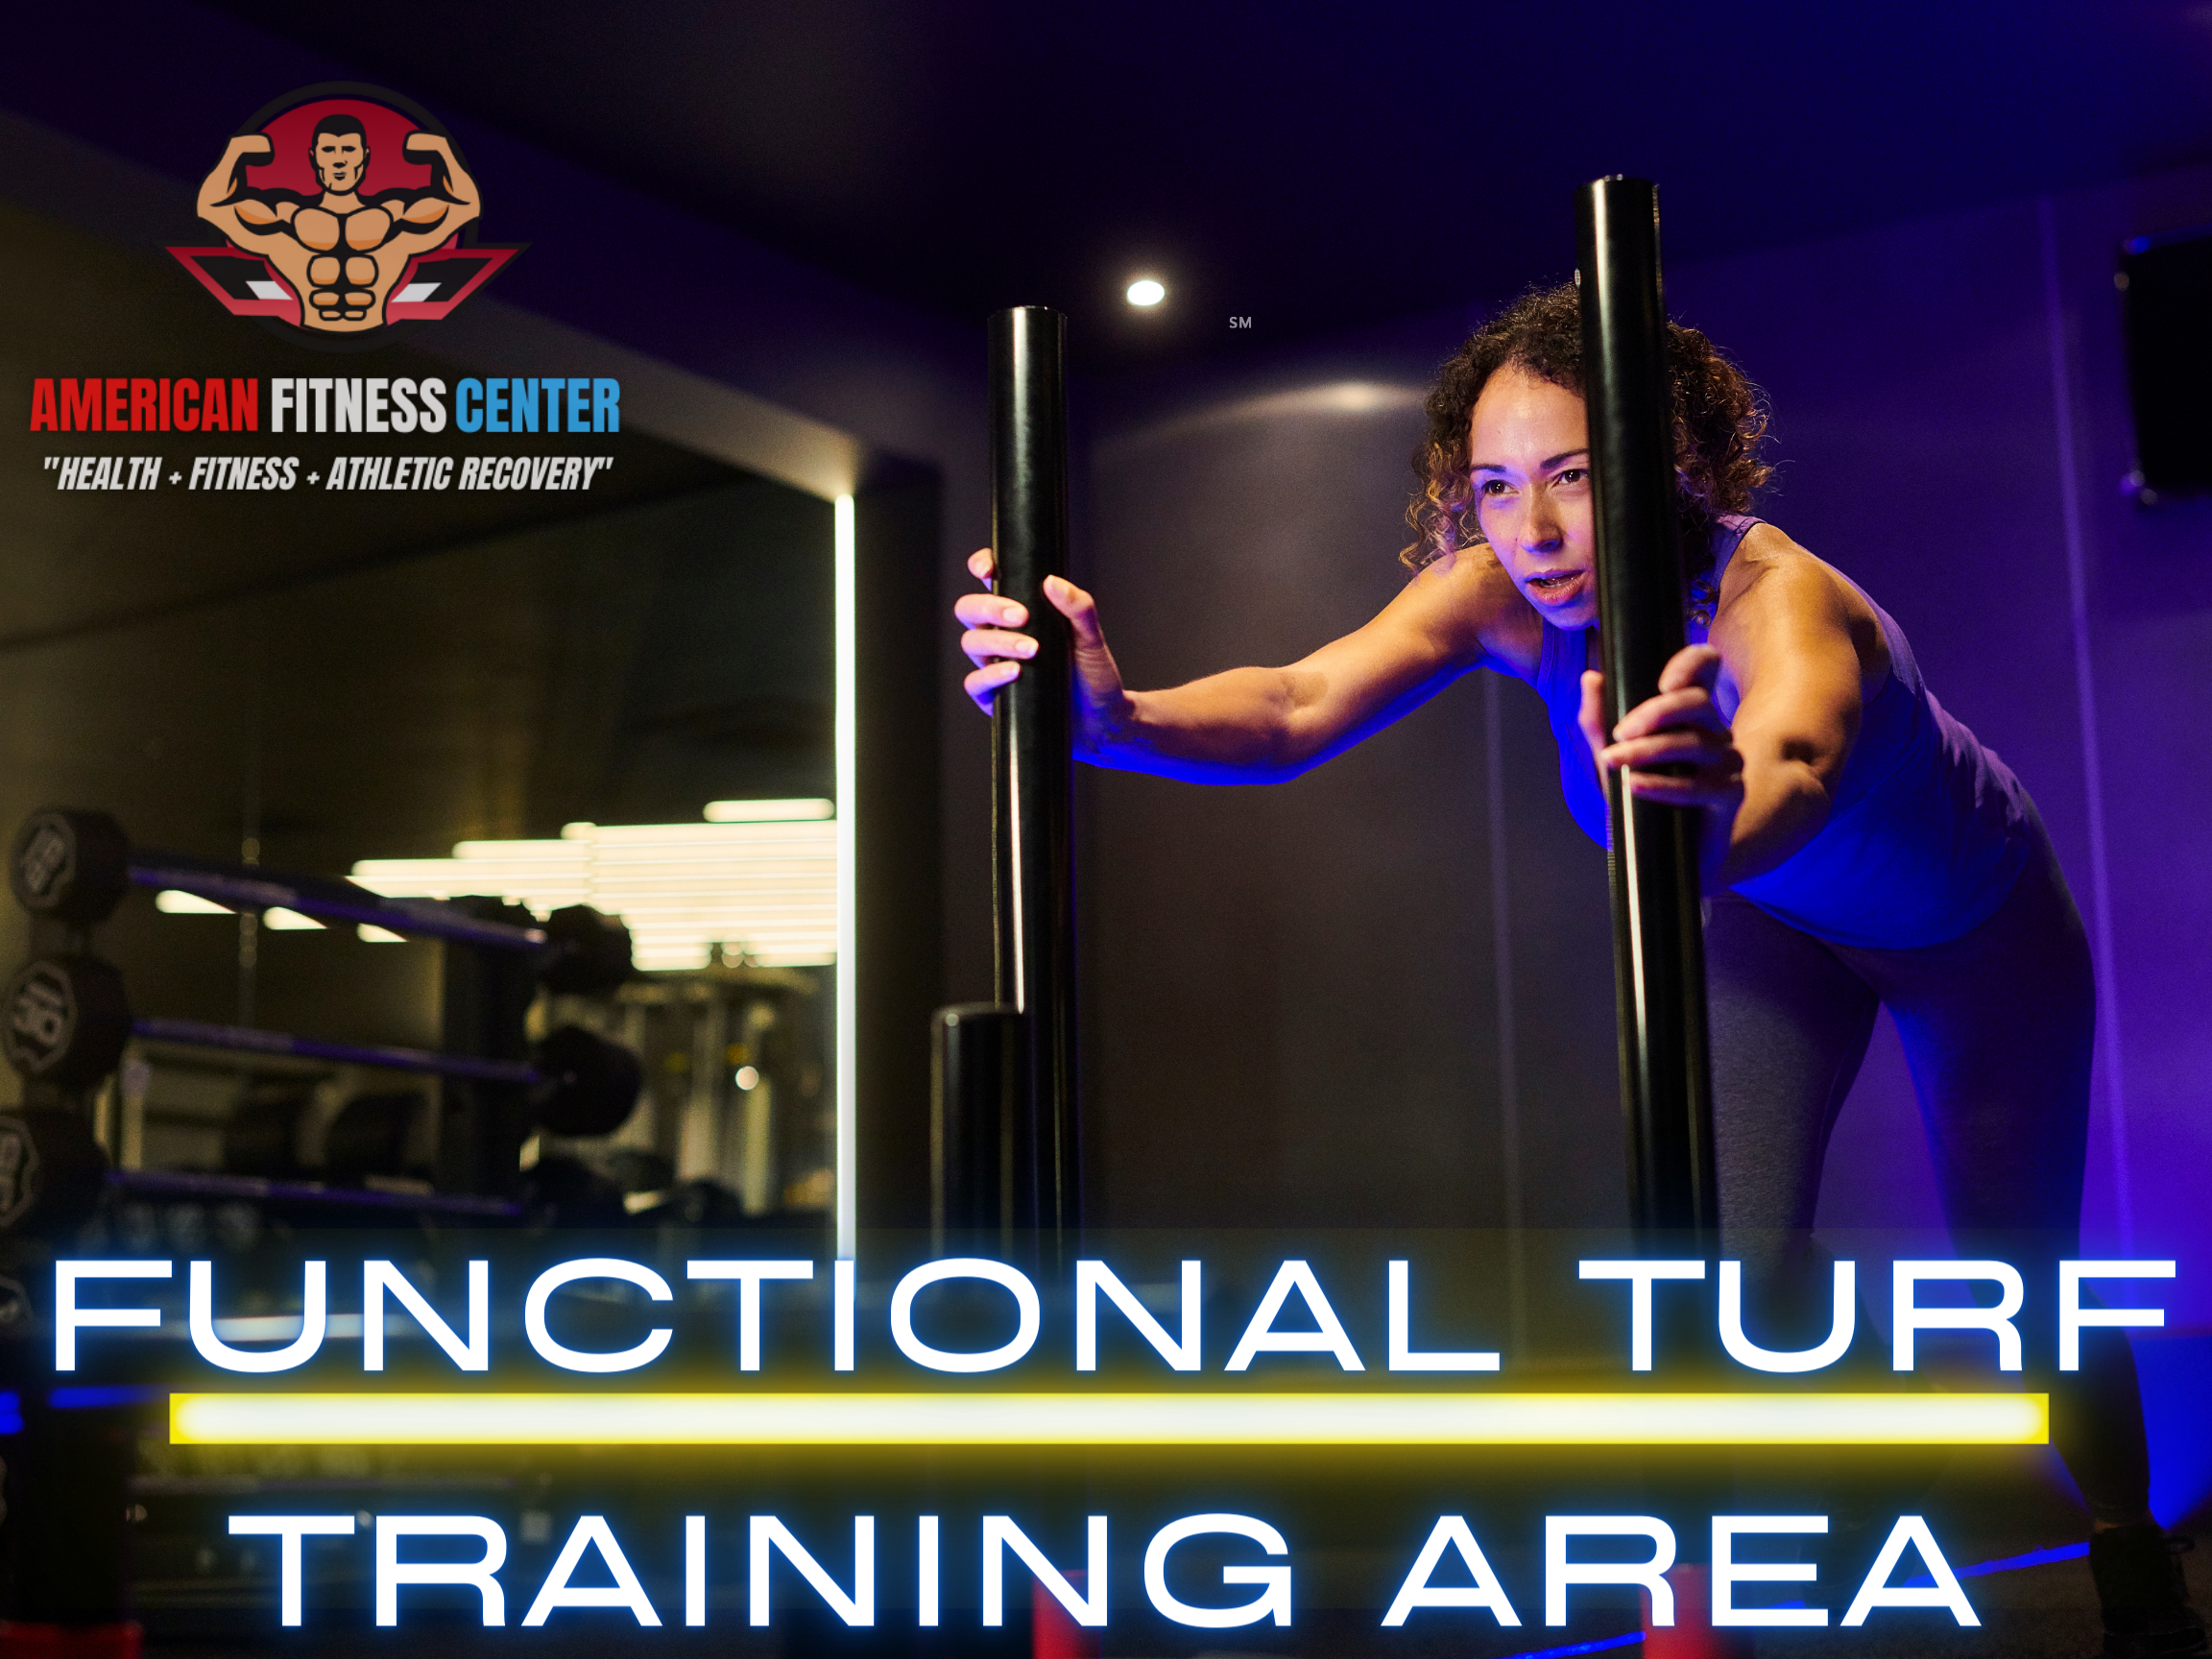 Functional-Fitness-Training-Workouts-in-Fayetteville-GA-American-Fitness-Center-North-Fayetteville